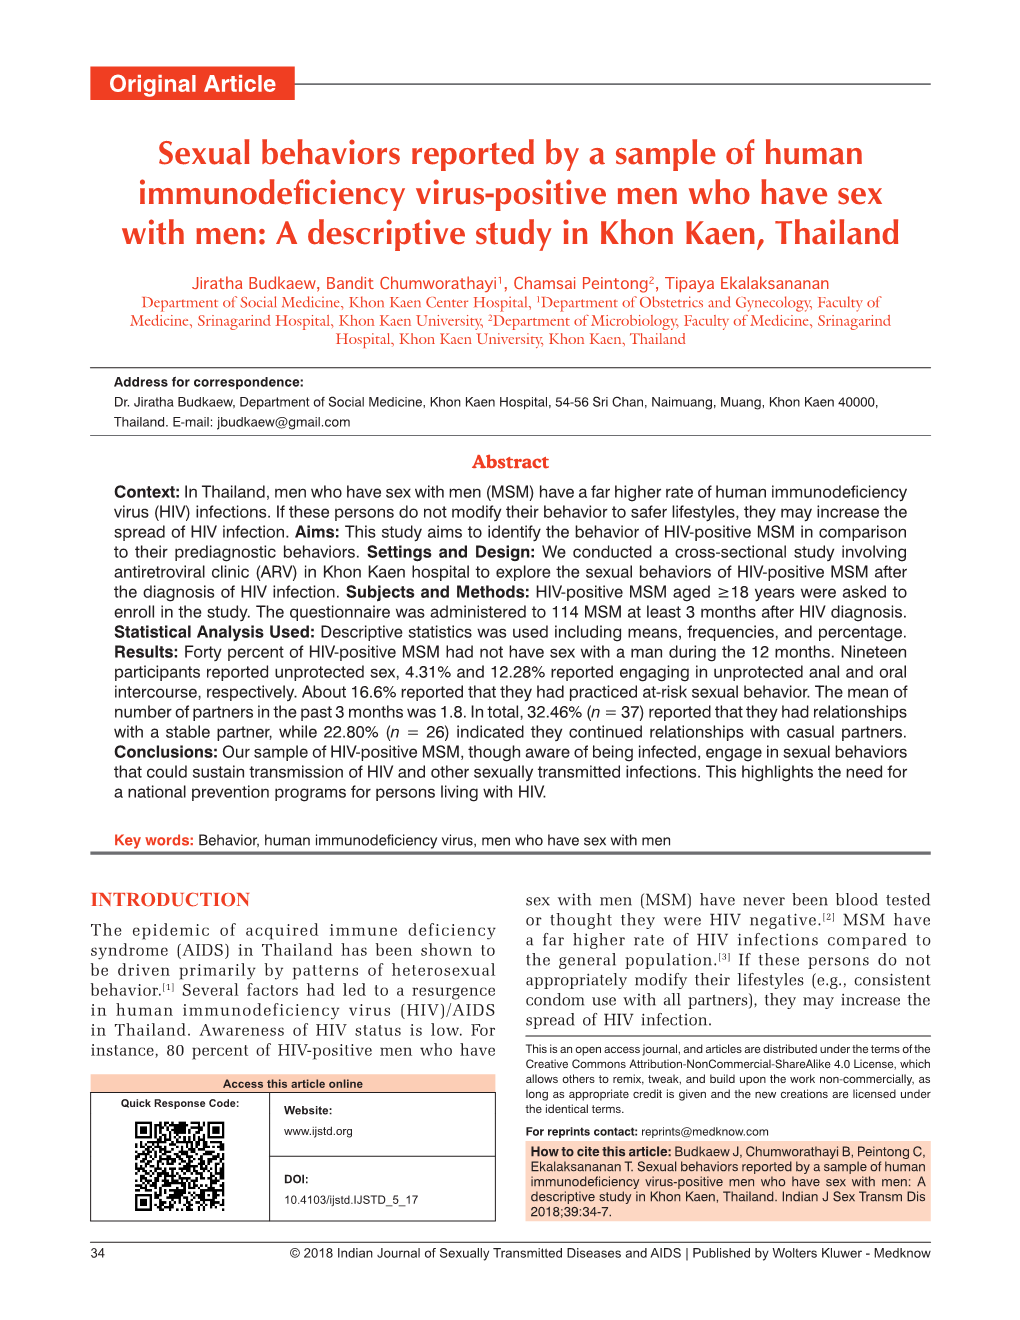 Sexual Behaviors Reported by a Sample of Human Immunodeficiency Virus‑Positive Men Who Have Sex with Men: a Descriptive Study in Khon Kaen, Thailand